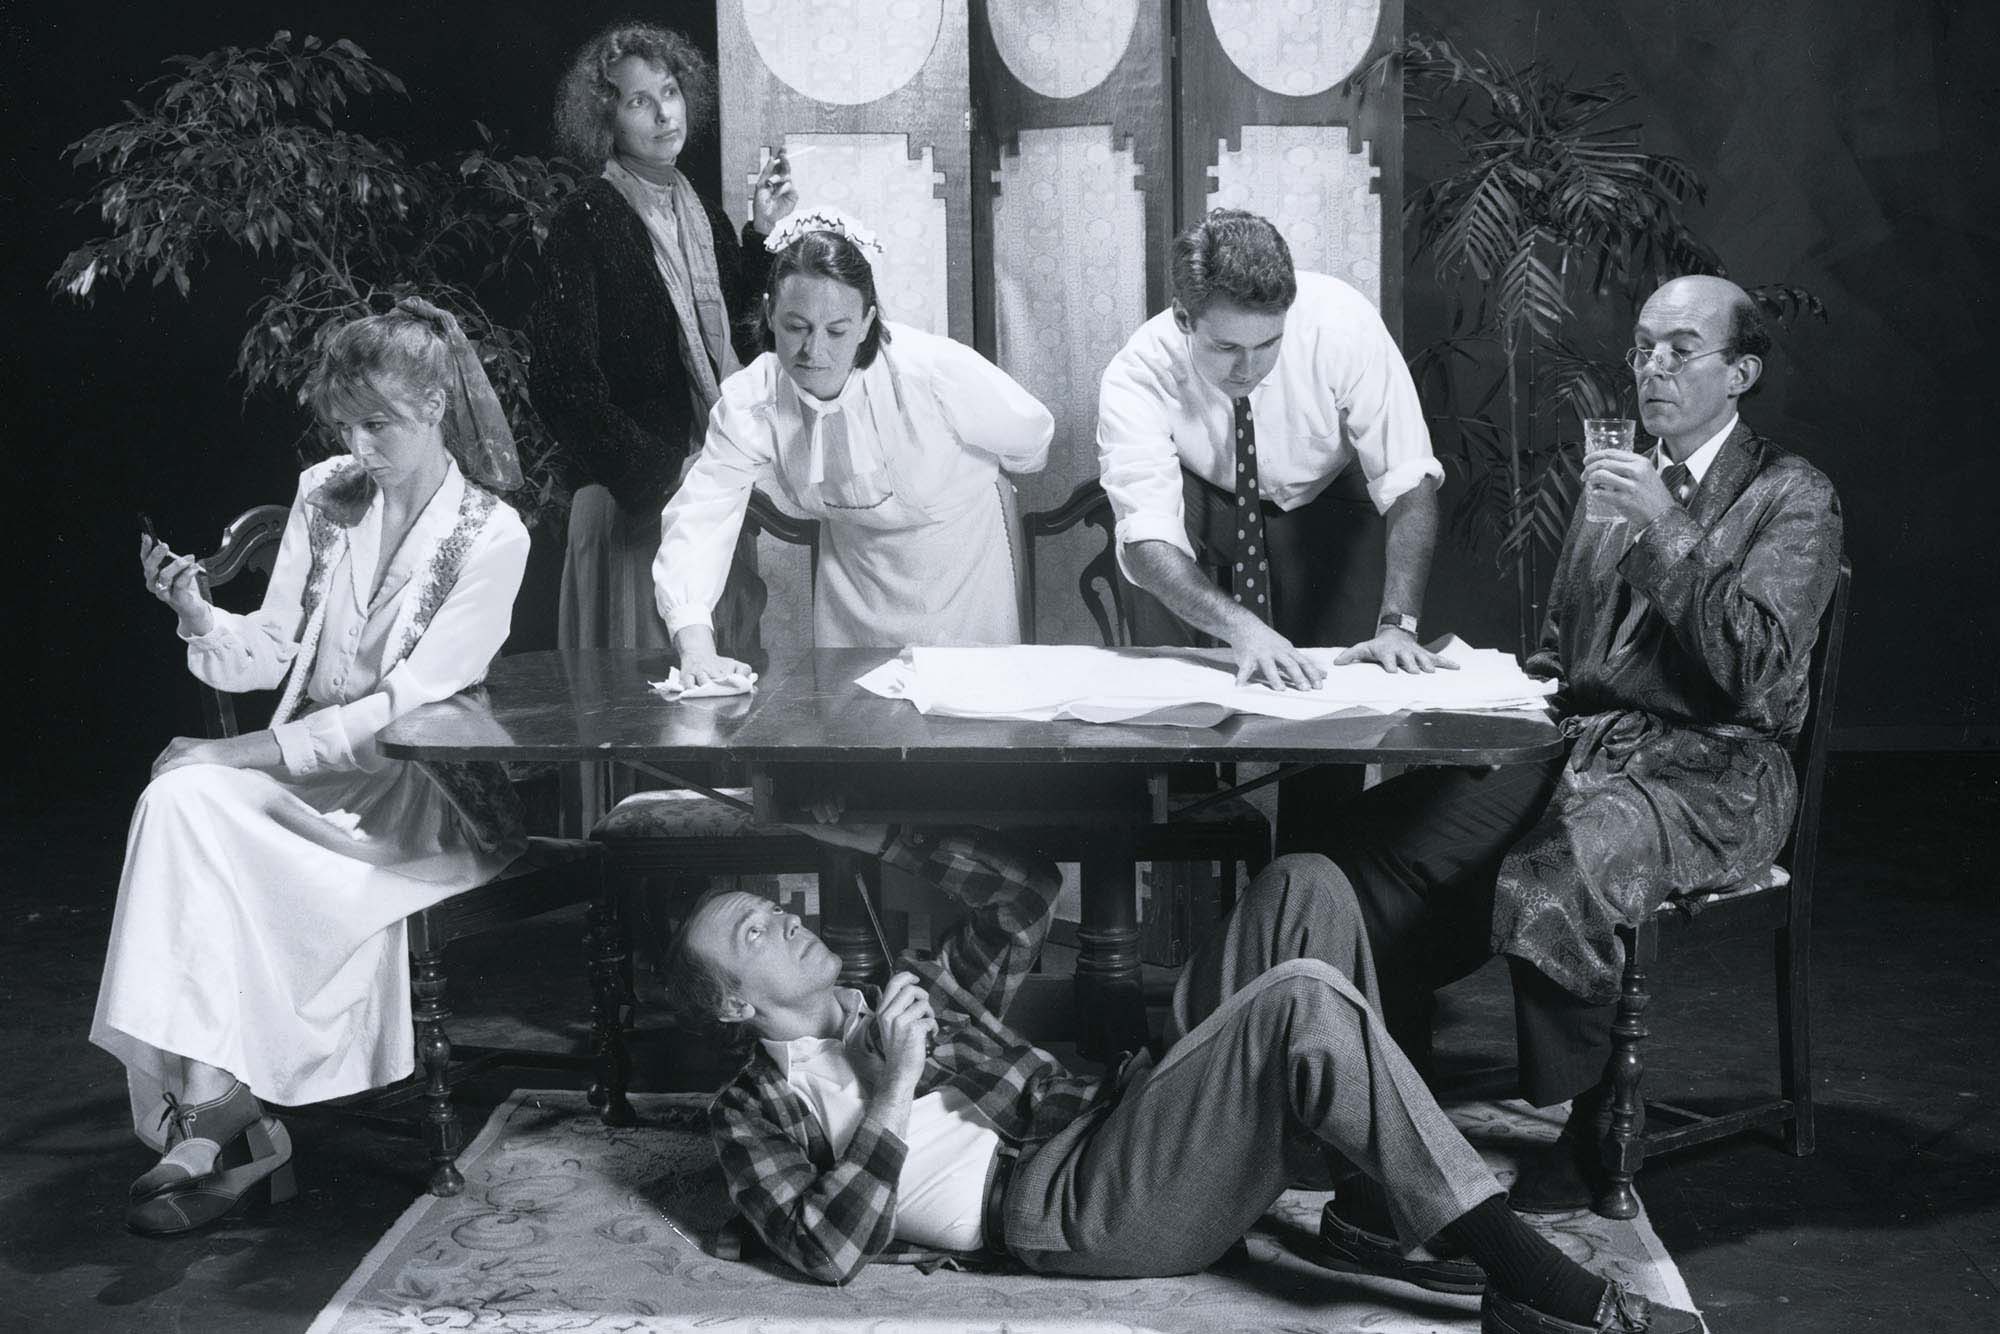 Cast on stage at a table during a play